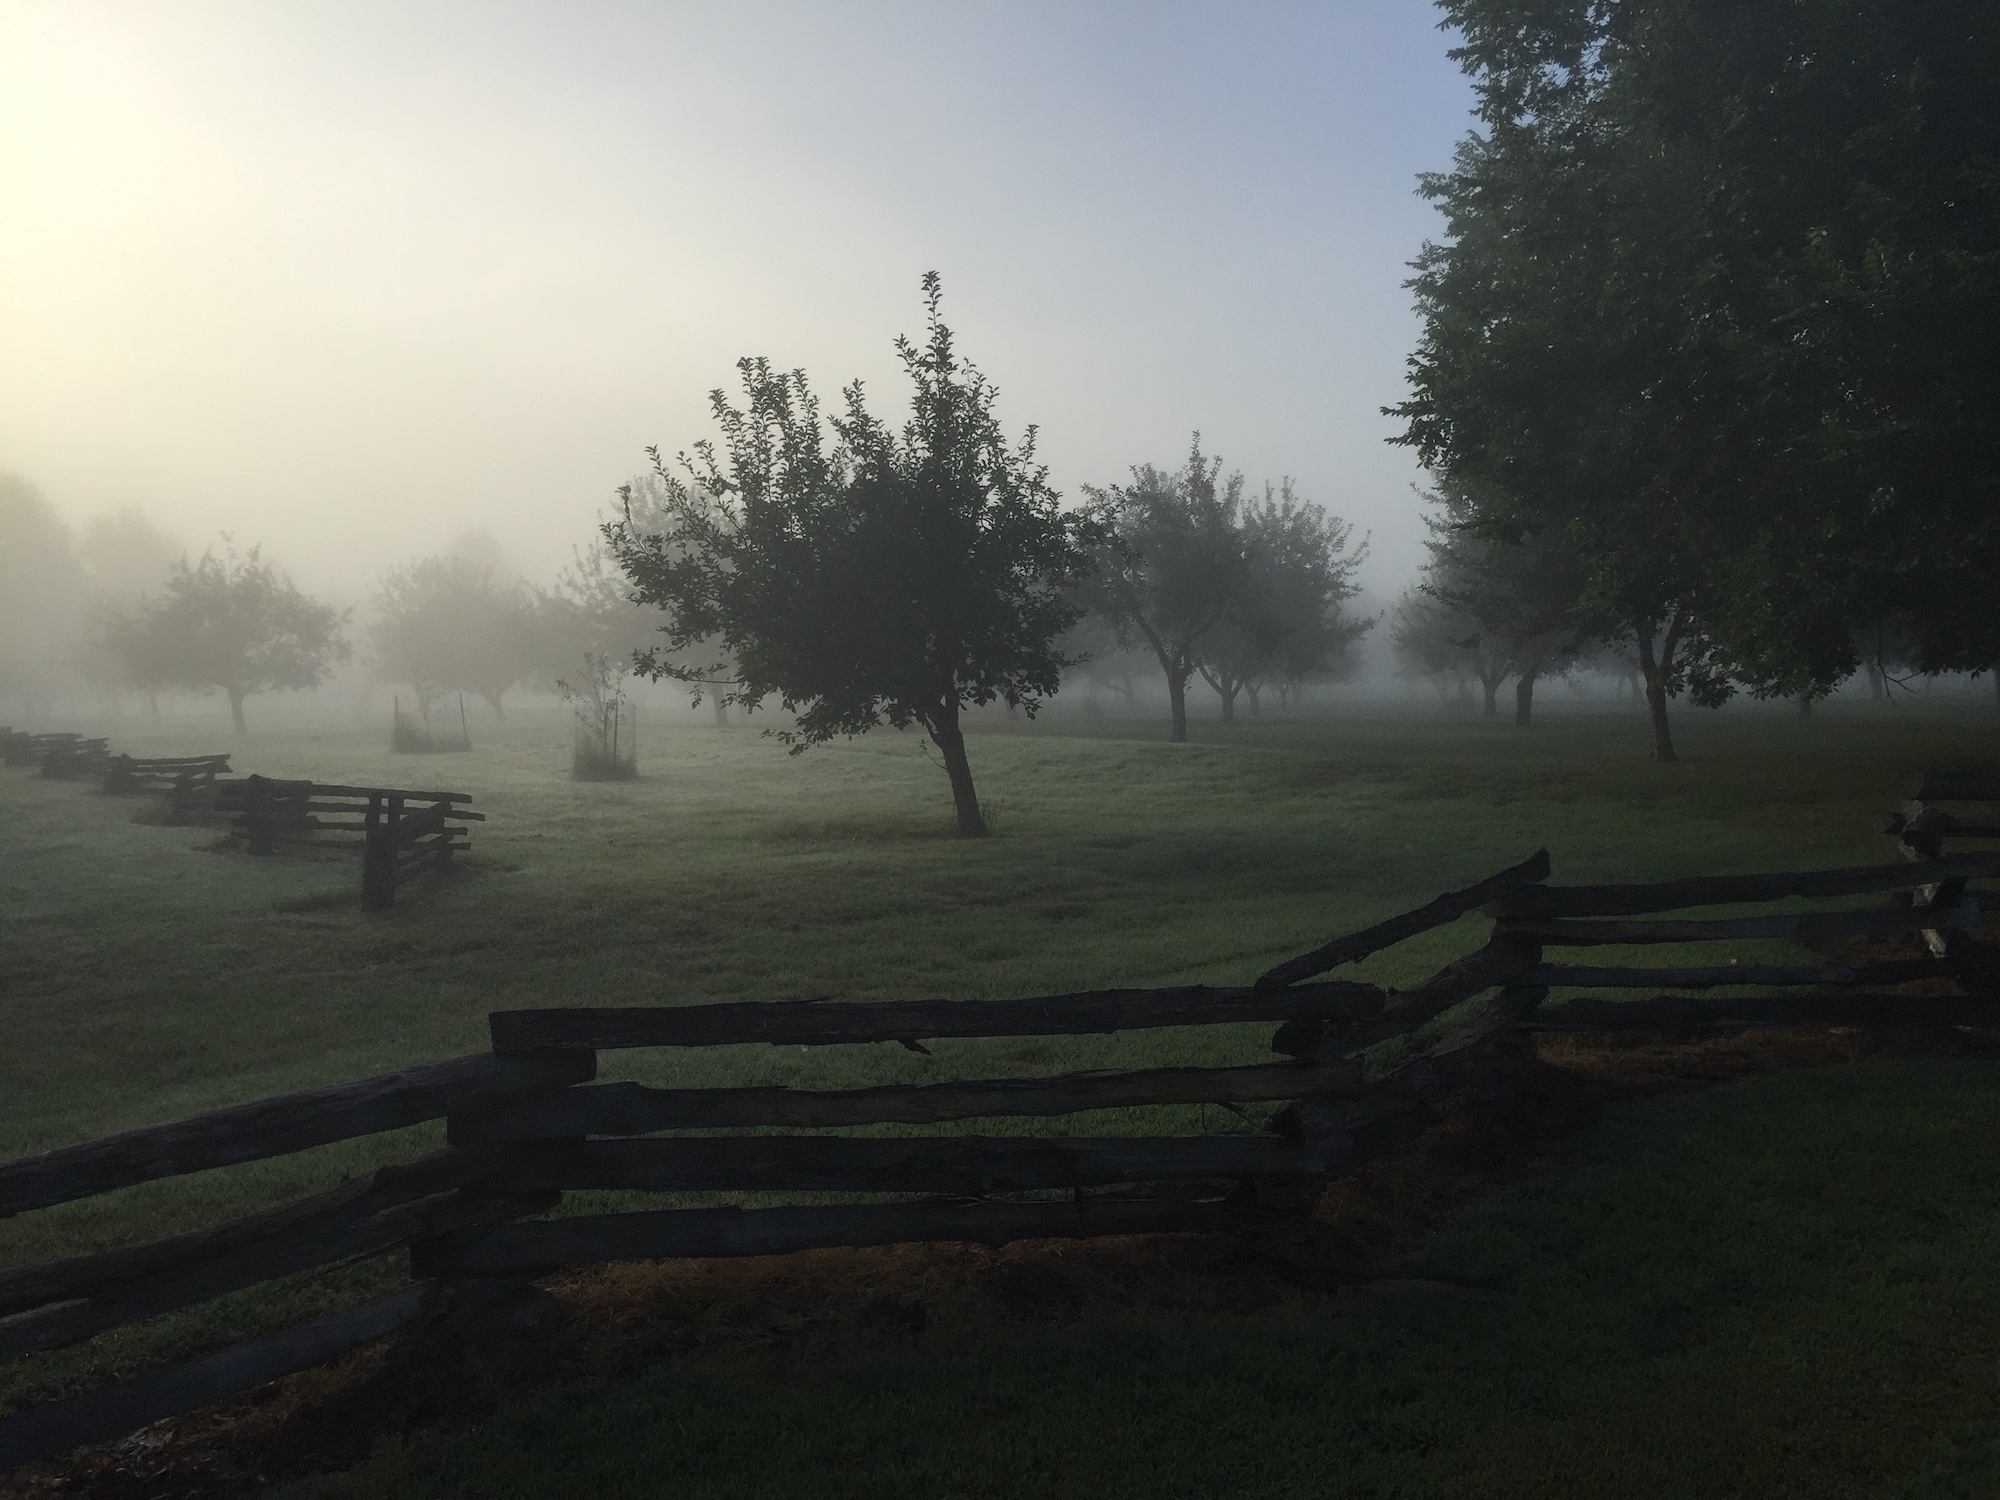 Misty morning in the Borden family apple orchard at the Prairie Grove Battlefield